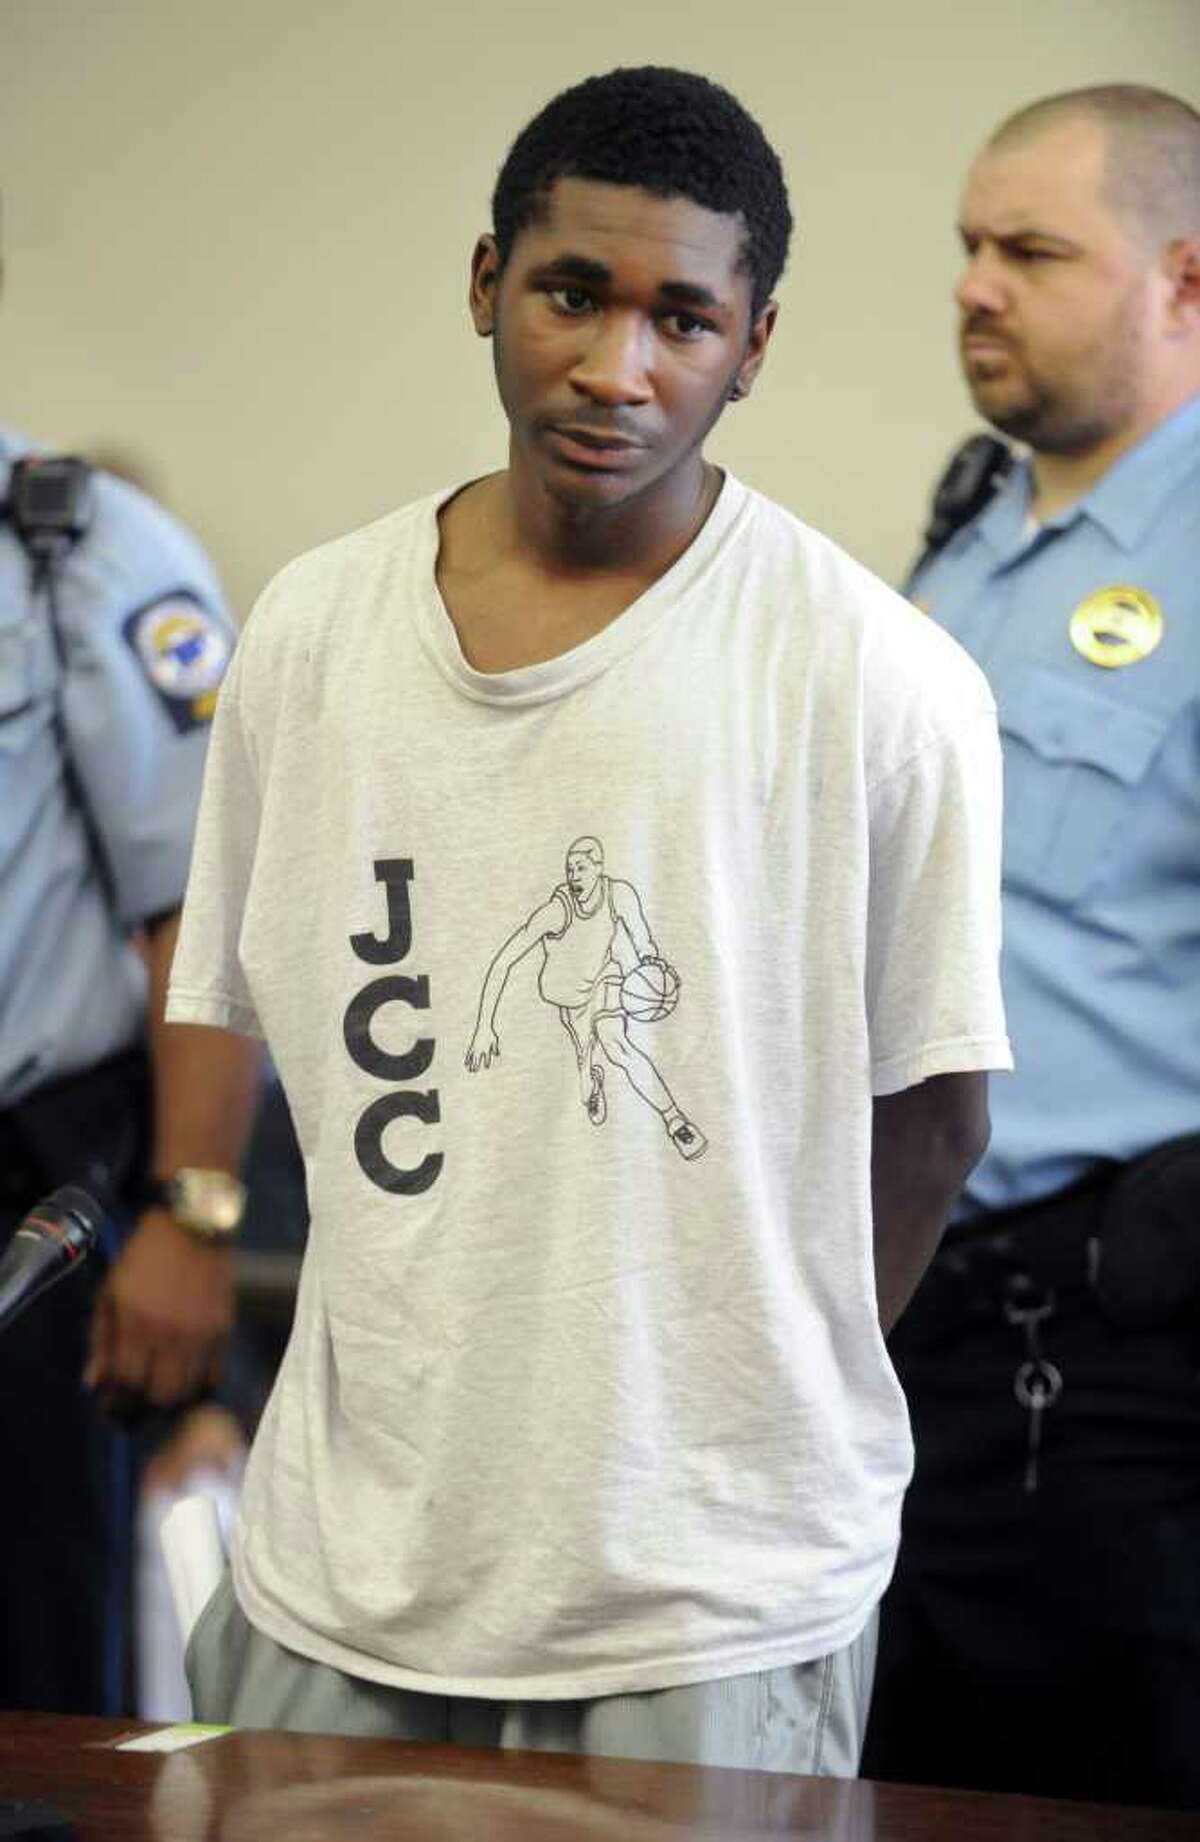 Lawrence Perry is arraigned in Superior Court in Bridgeport, Conn. Thursday, April 28, 2011 on felony murder charges.